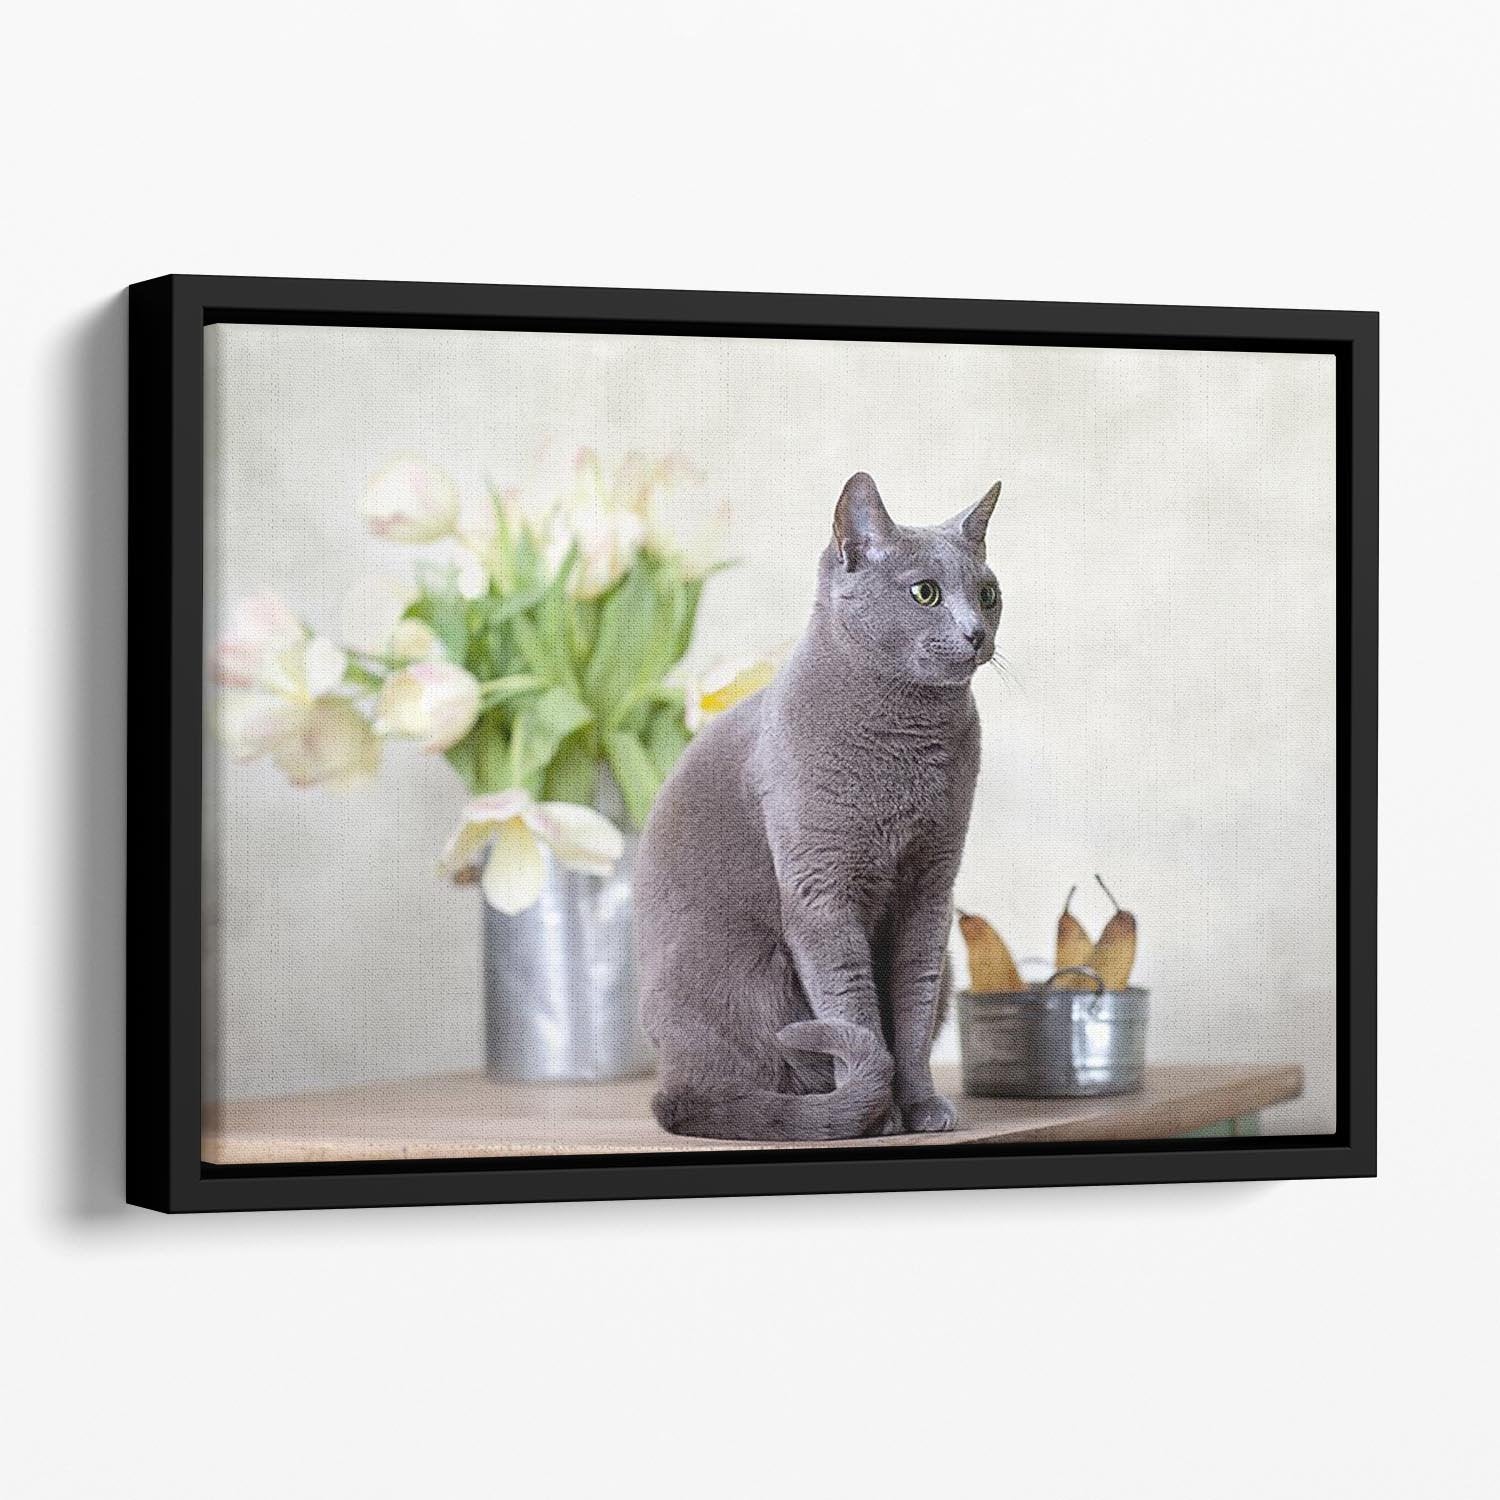 Russian Blue cat sitting on table with pears and tulips Floating Framed Canvas - Canvas Art Rocks - 1